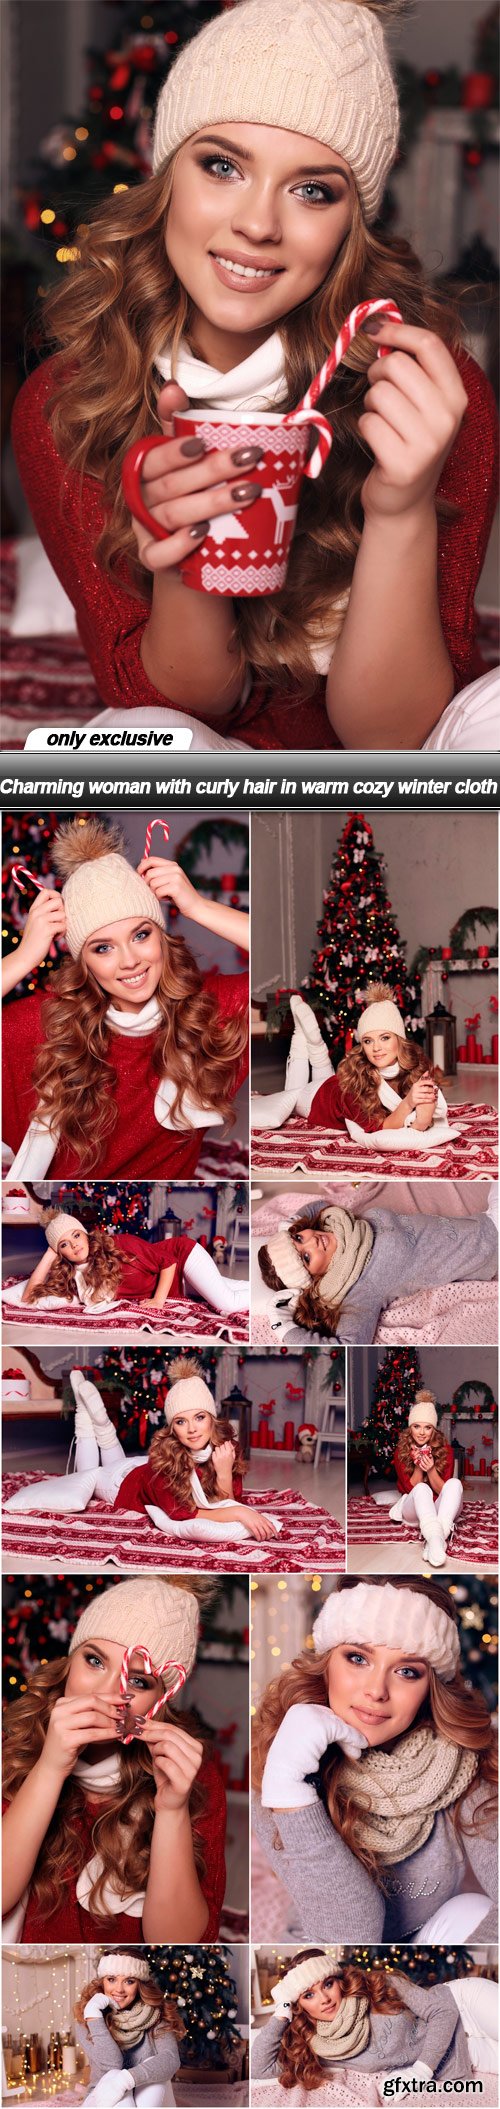 Charming woman with curly hair in warm cozy winter cloth - 11 UHQ JPEG